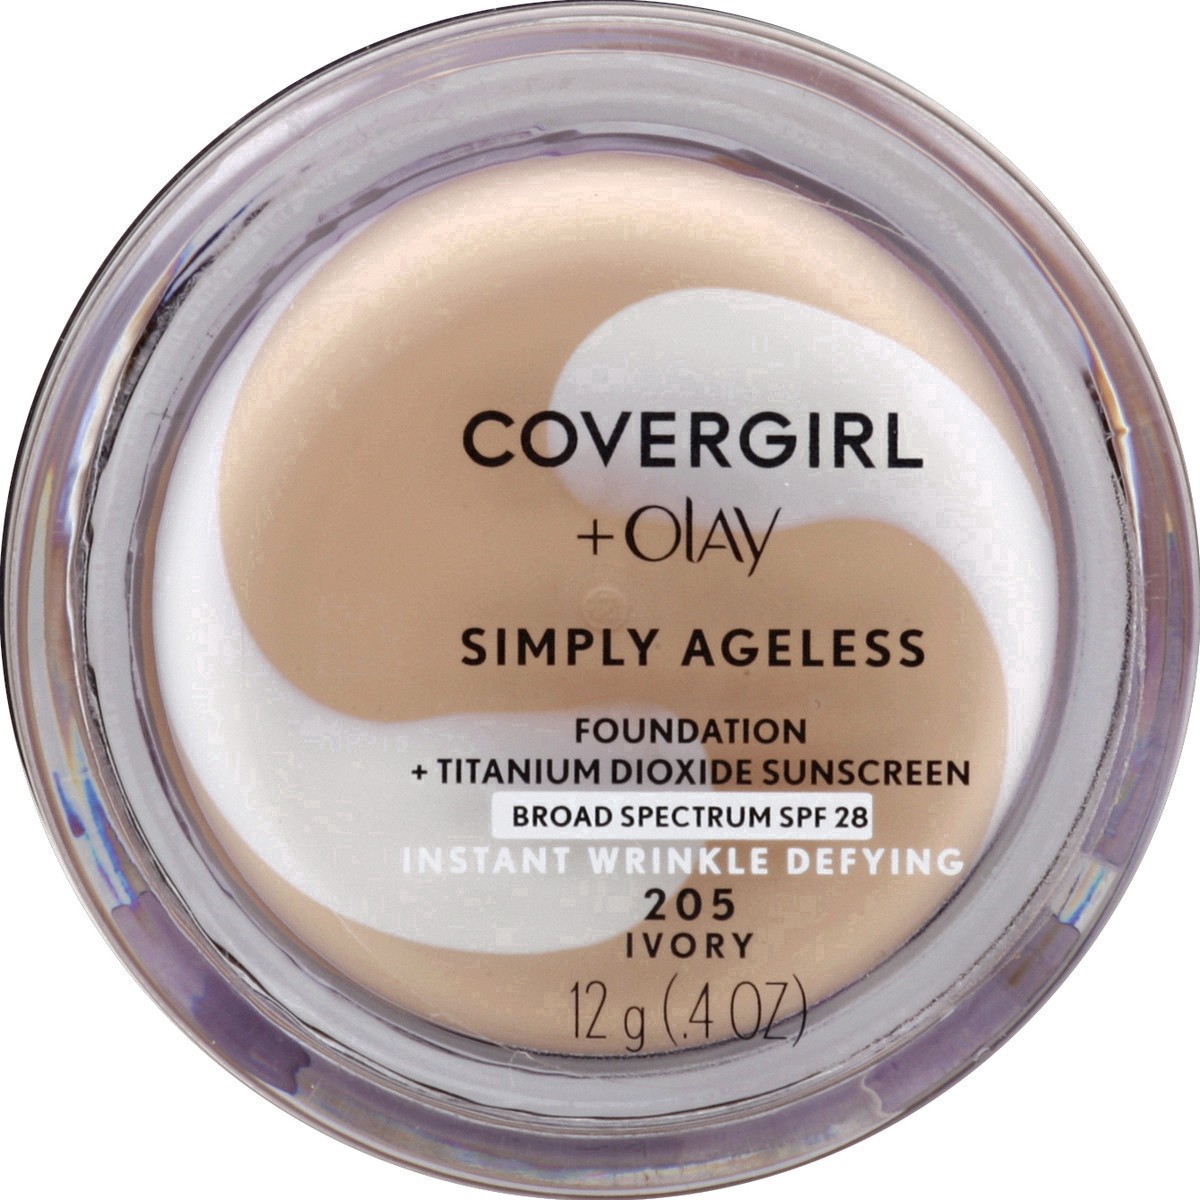 slide 14 of 21, Covergirl + Olay Simply Ageless Instant Wrinkle Defying Foundation, Ivory, 0.4 oz